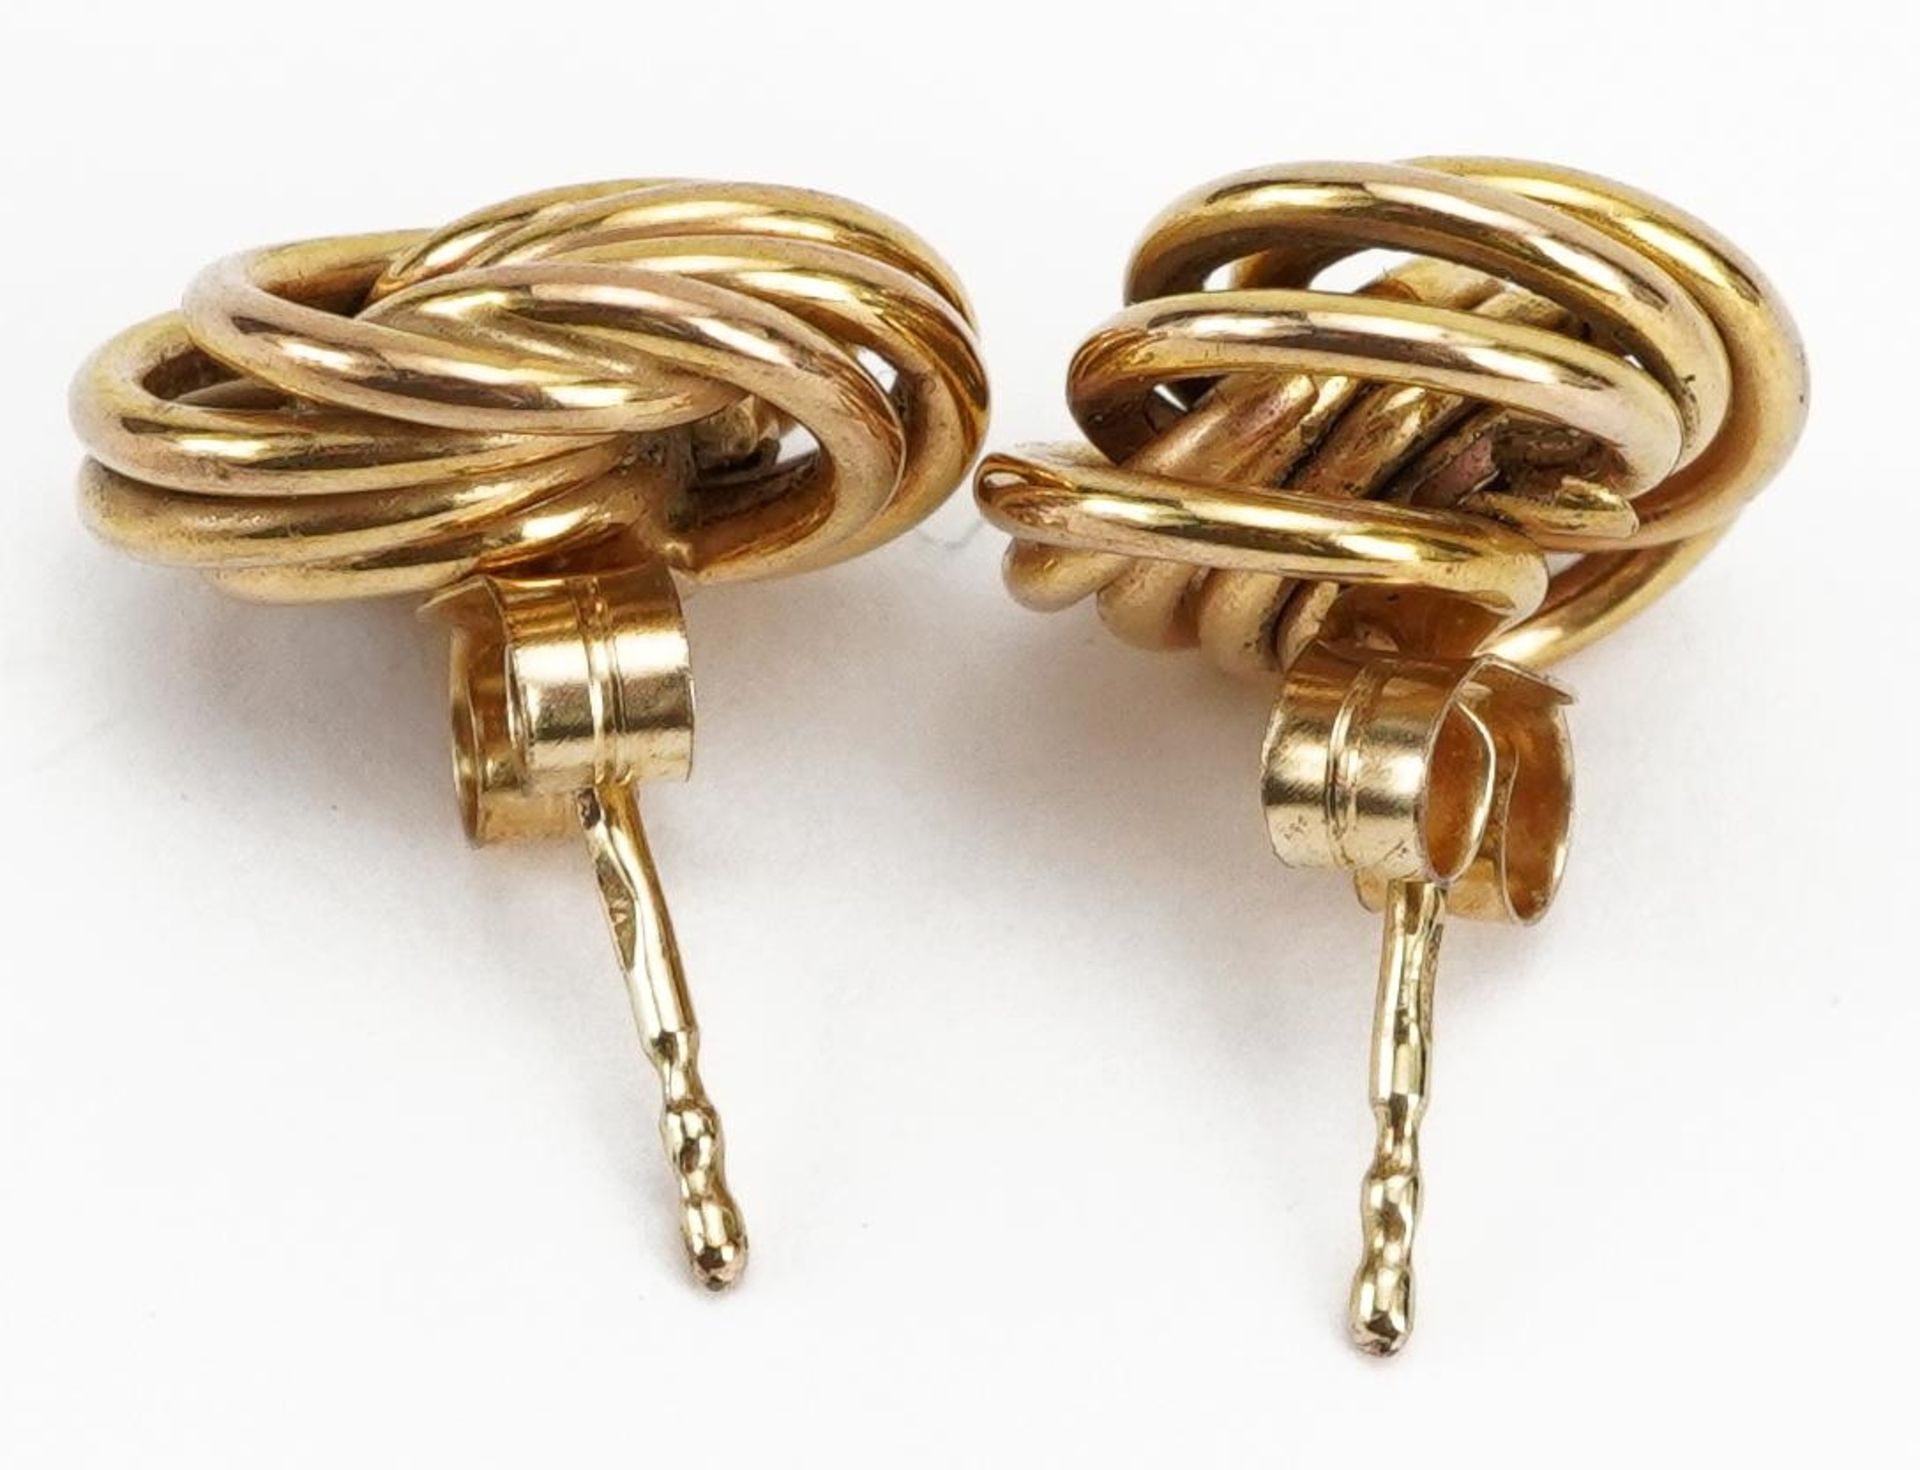 Pair of 9ct gold knot design stud earrings, 1.2cm in diameter, 1.9g : For further information on - Image 2 of 2